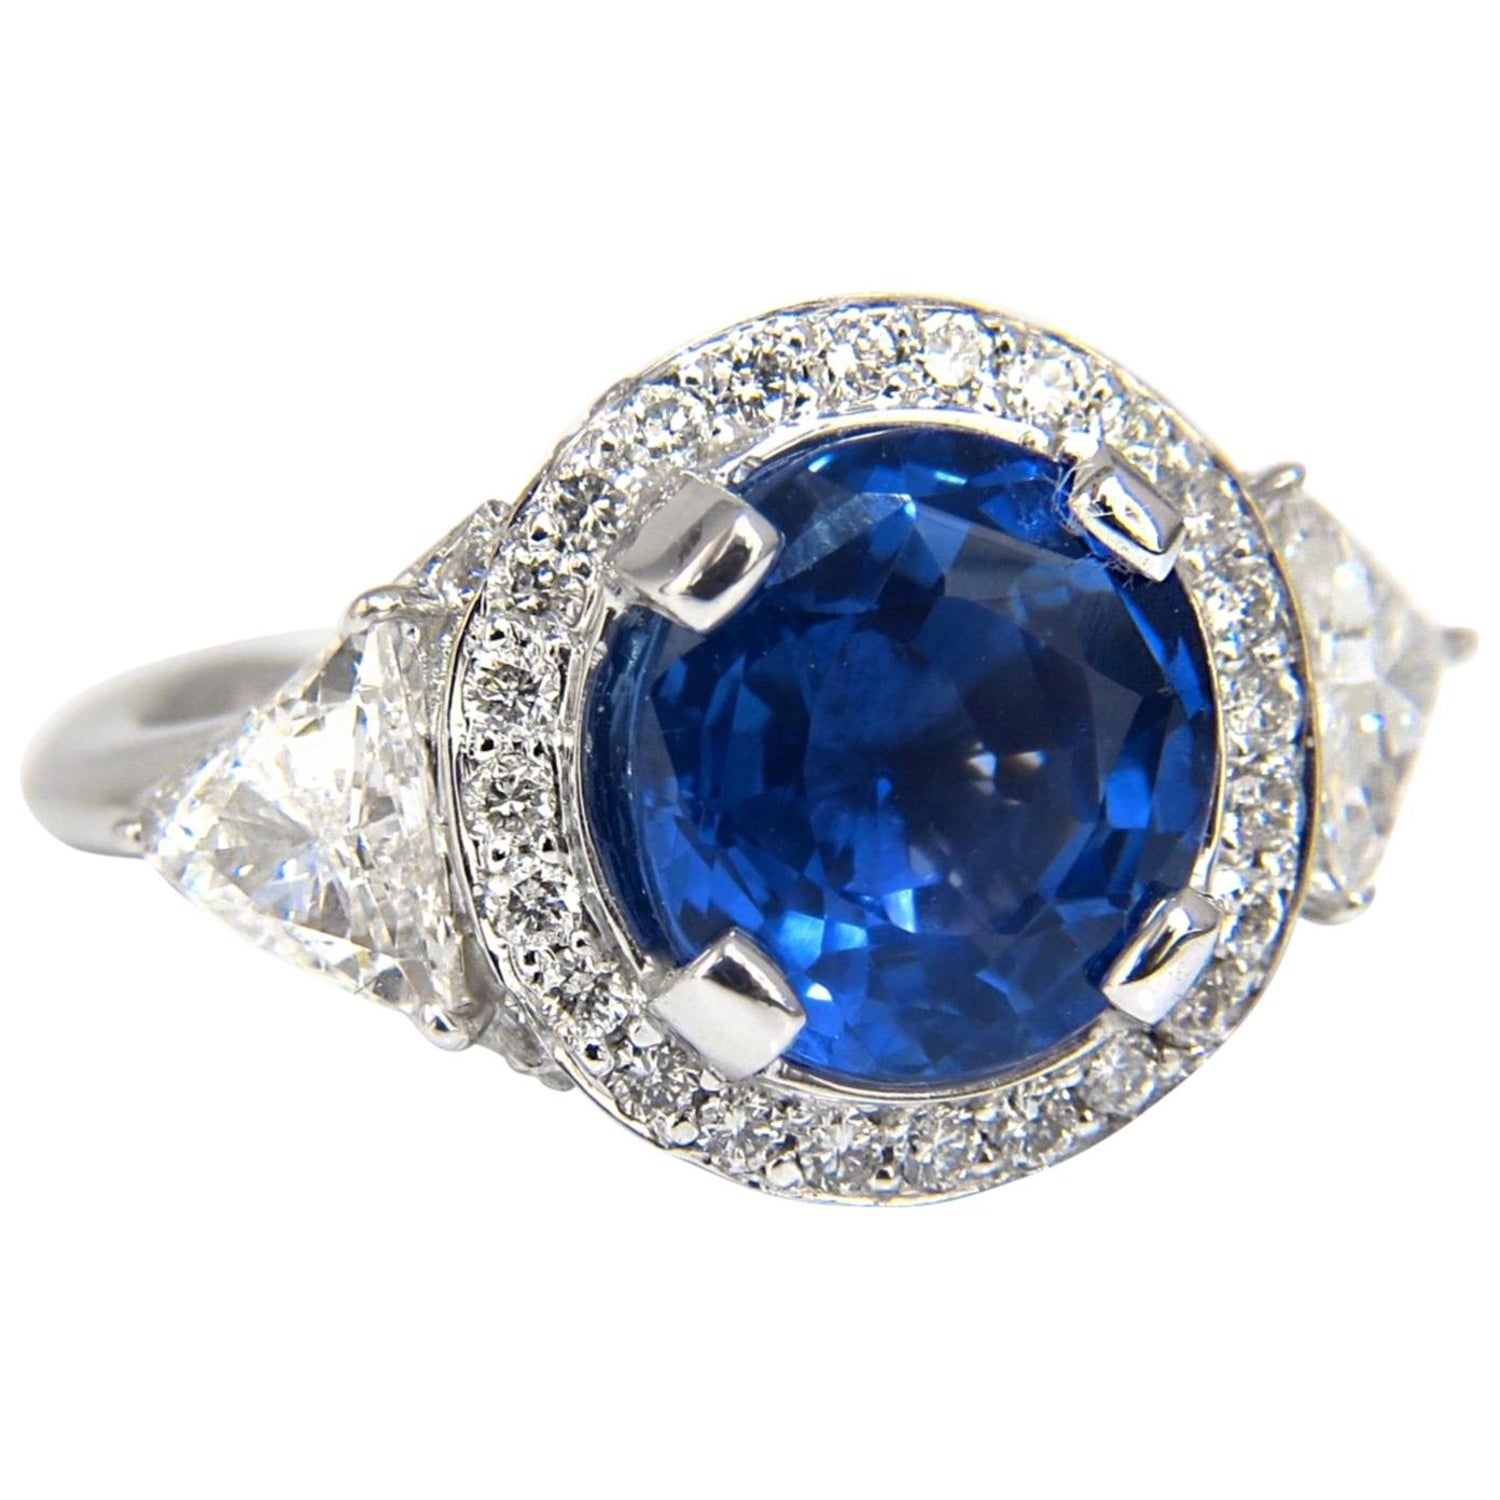 Natural Blue Tanzanite 14KT White Gold Classy Trillion Cut 1.20Ct Solitaire Ring 